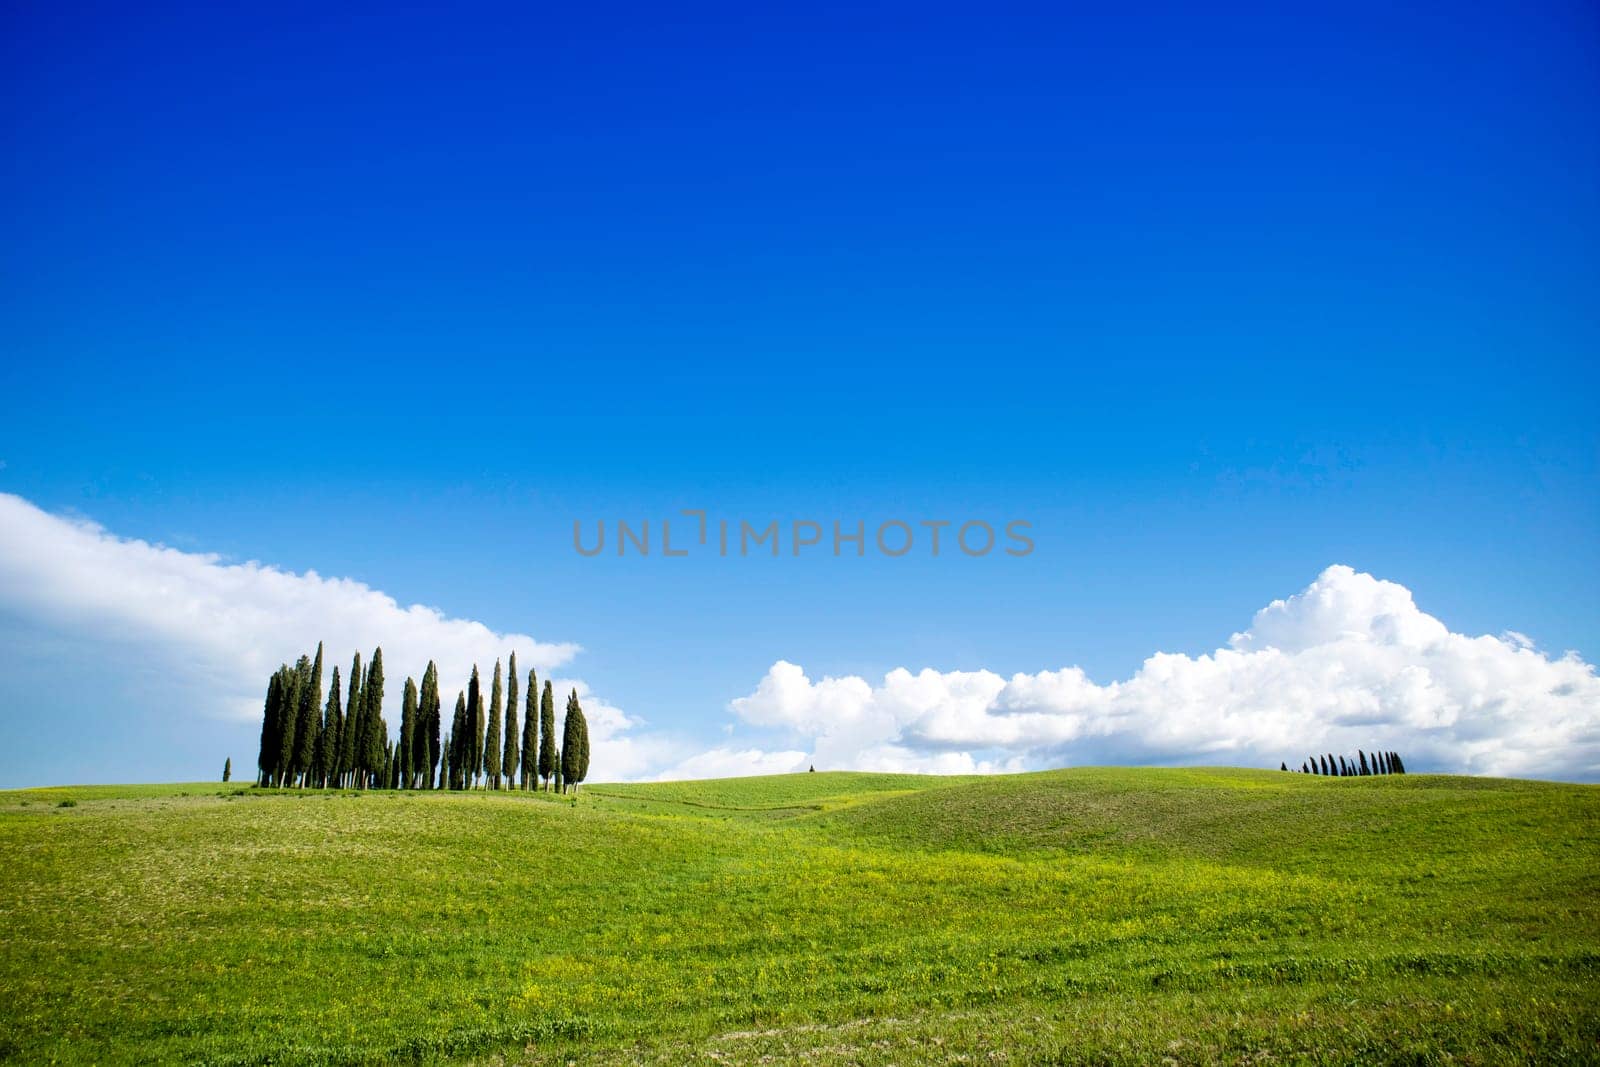 Photographic documentation of the cypresses in the province of Siena  by fotografiche.eu